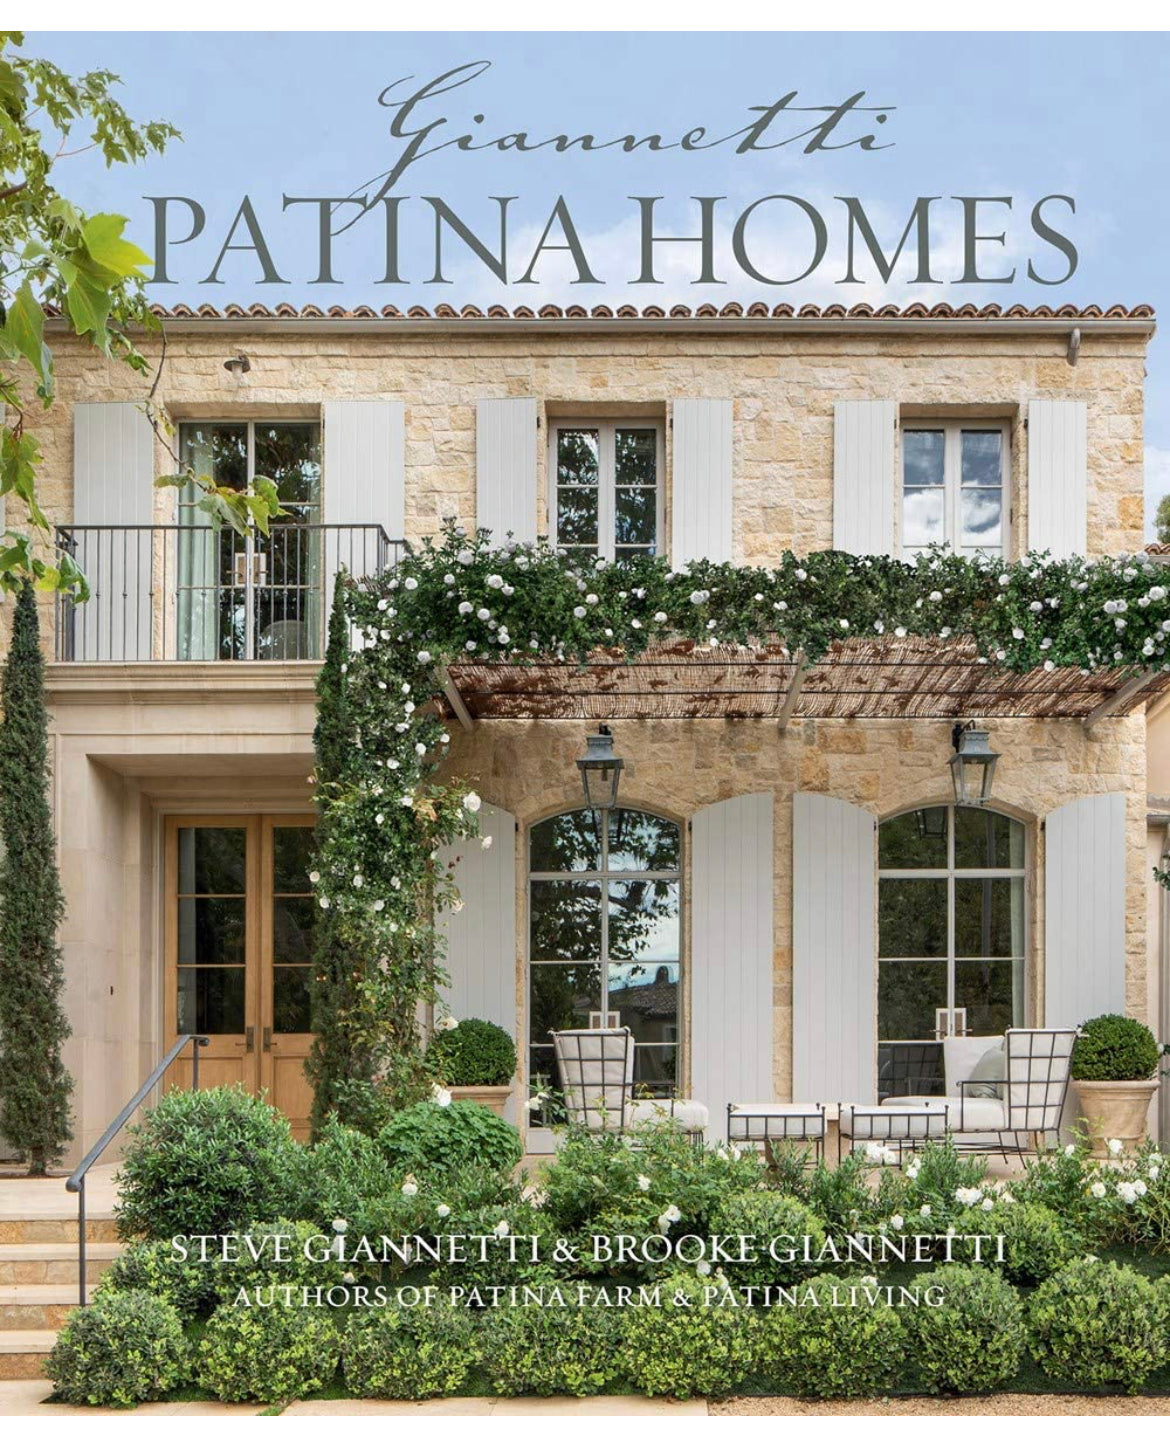 Giannetti Patina Homes